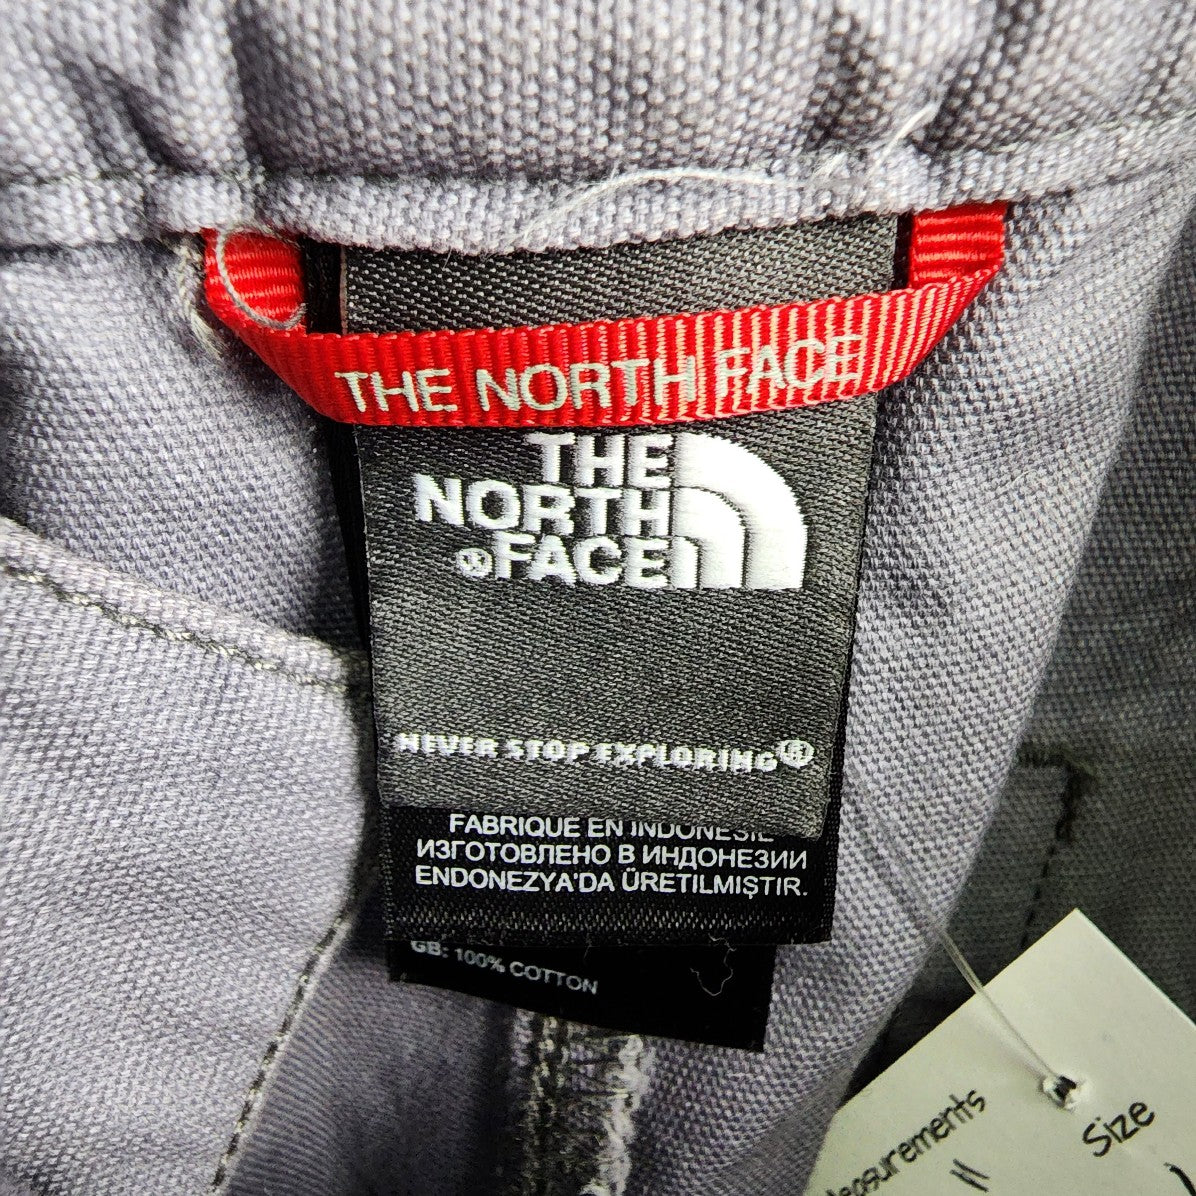 The North Face Grey Cotton Shorts Size 6